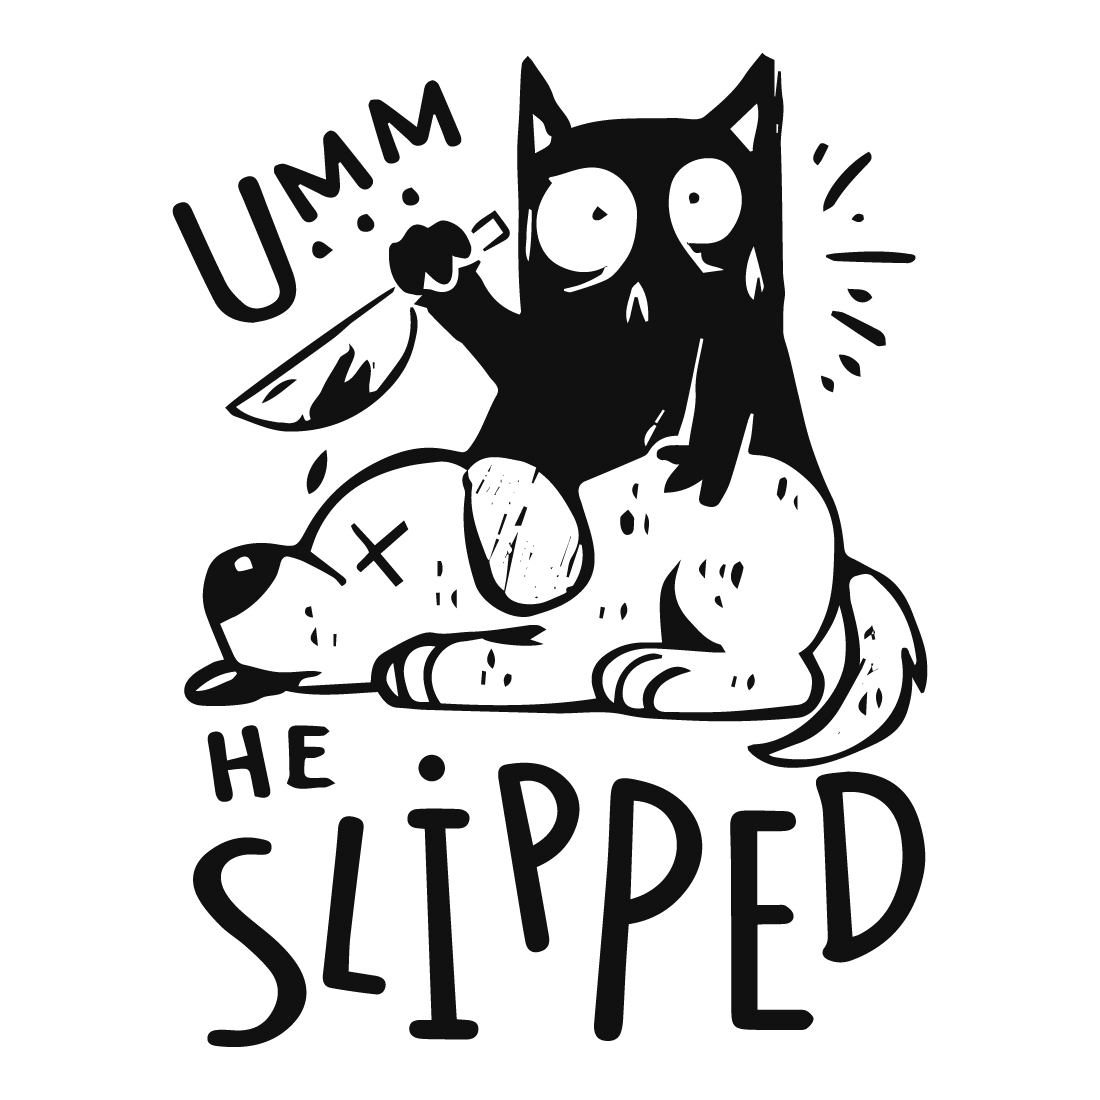 Umm, he slipped Cute funny cat killed or murdered the dog Vector Illustration for tshirt preview image.